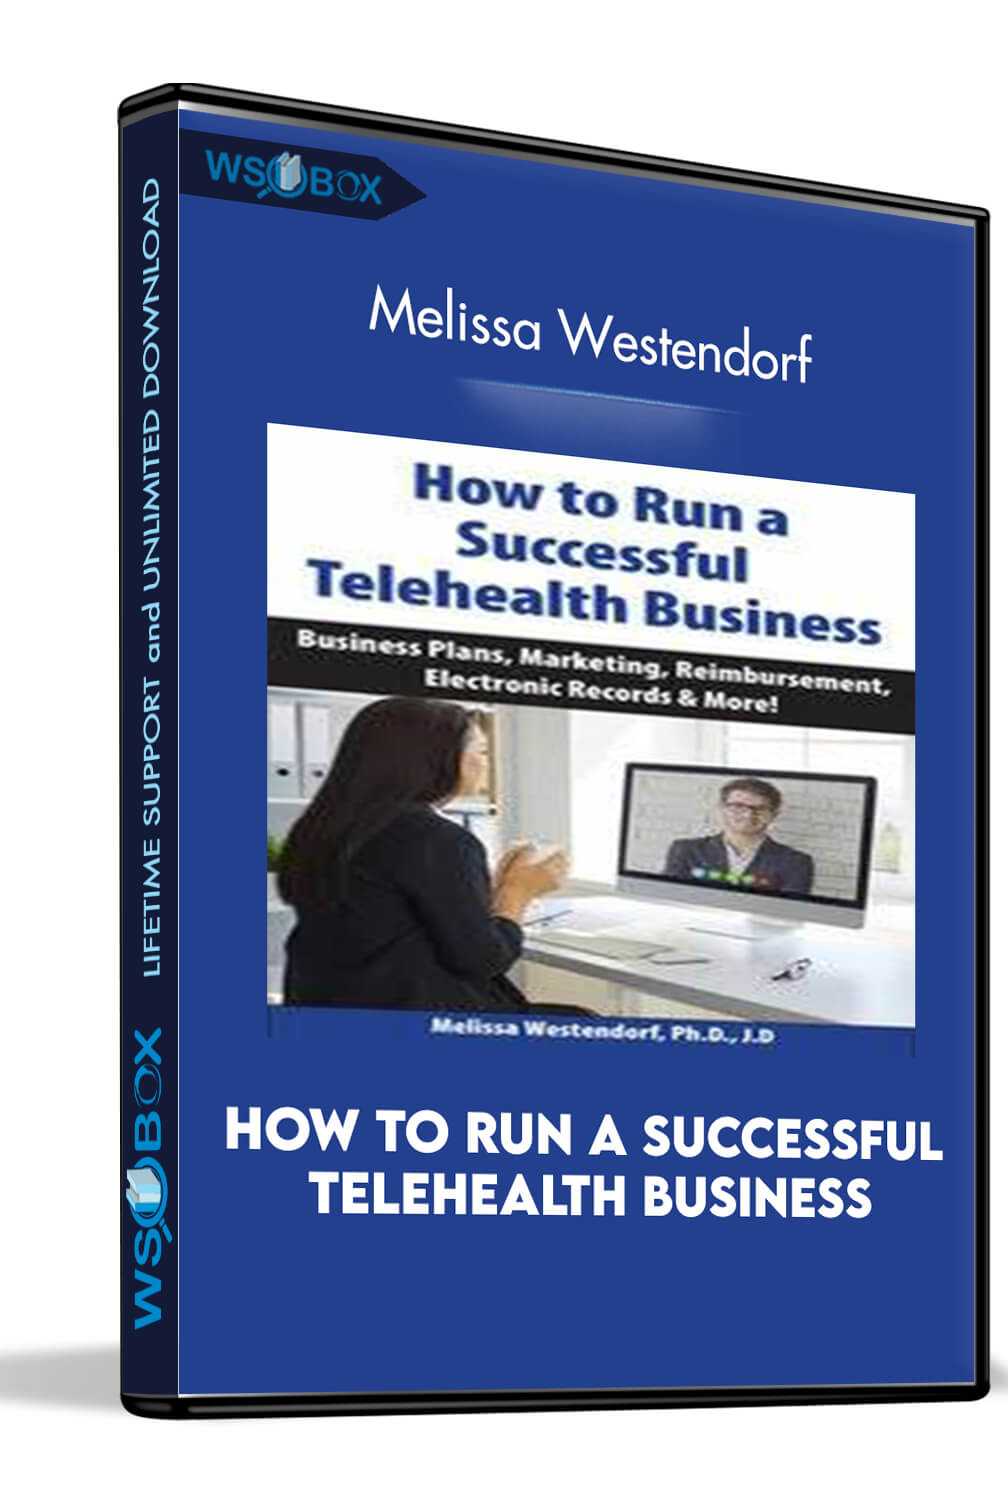 How to Run a Successful Telehealth Business: Business Plans, Marketing, Reimbursement, Electronic Records and More! - Melissa Westendorf